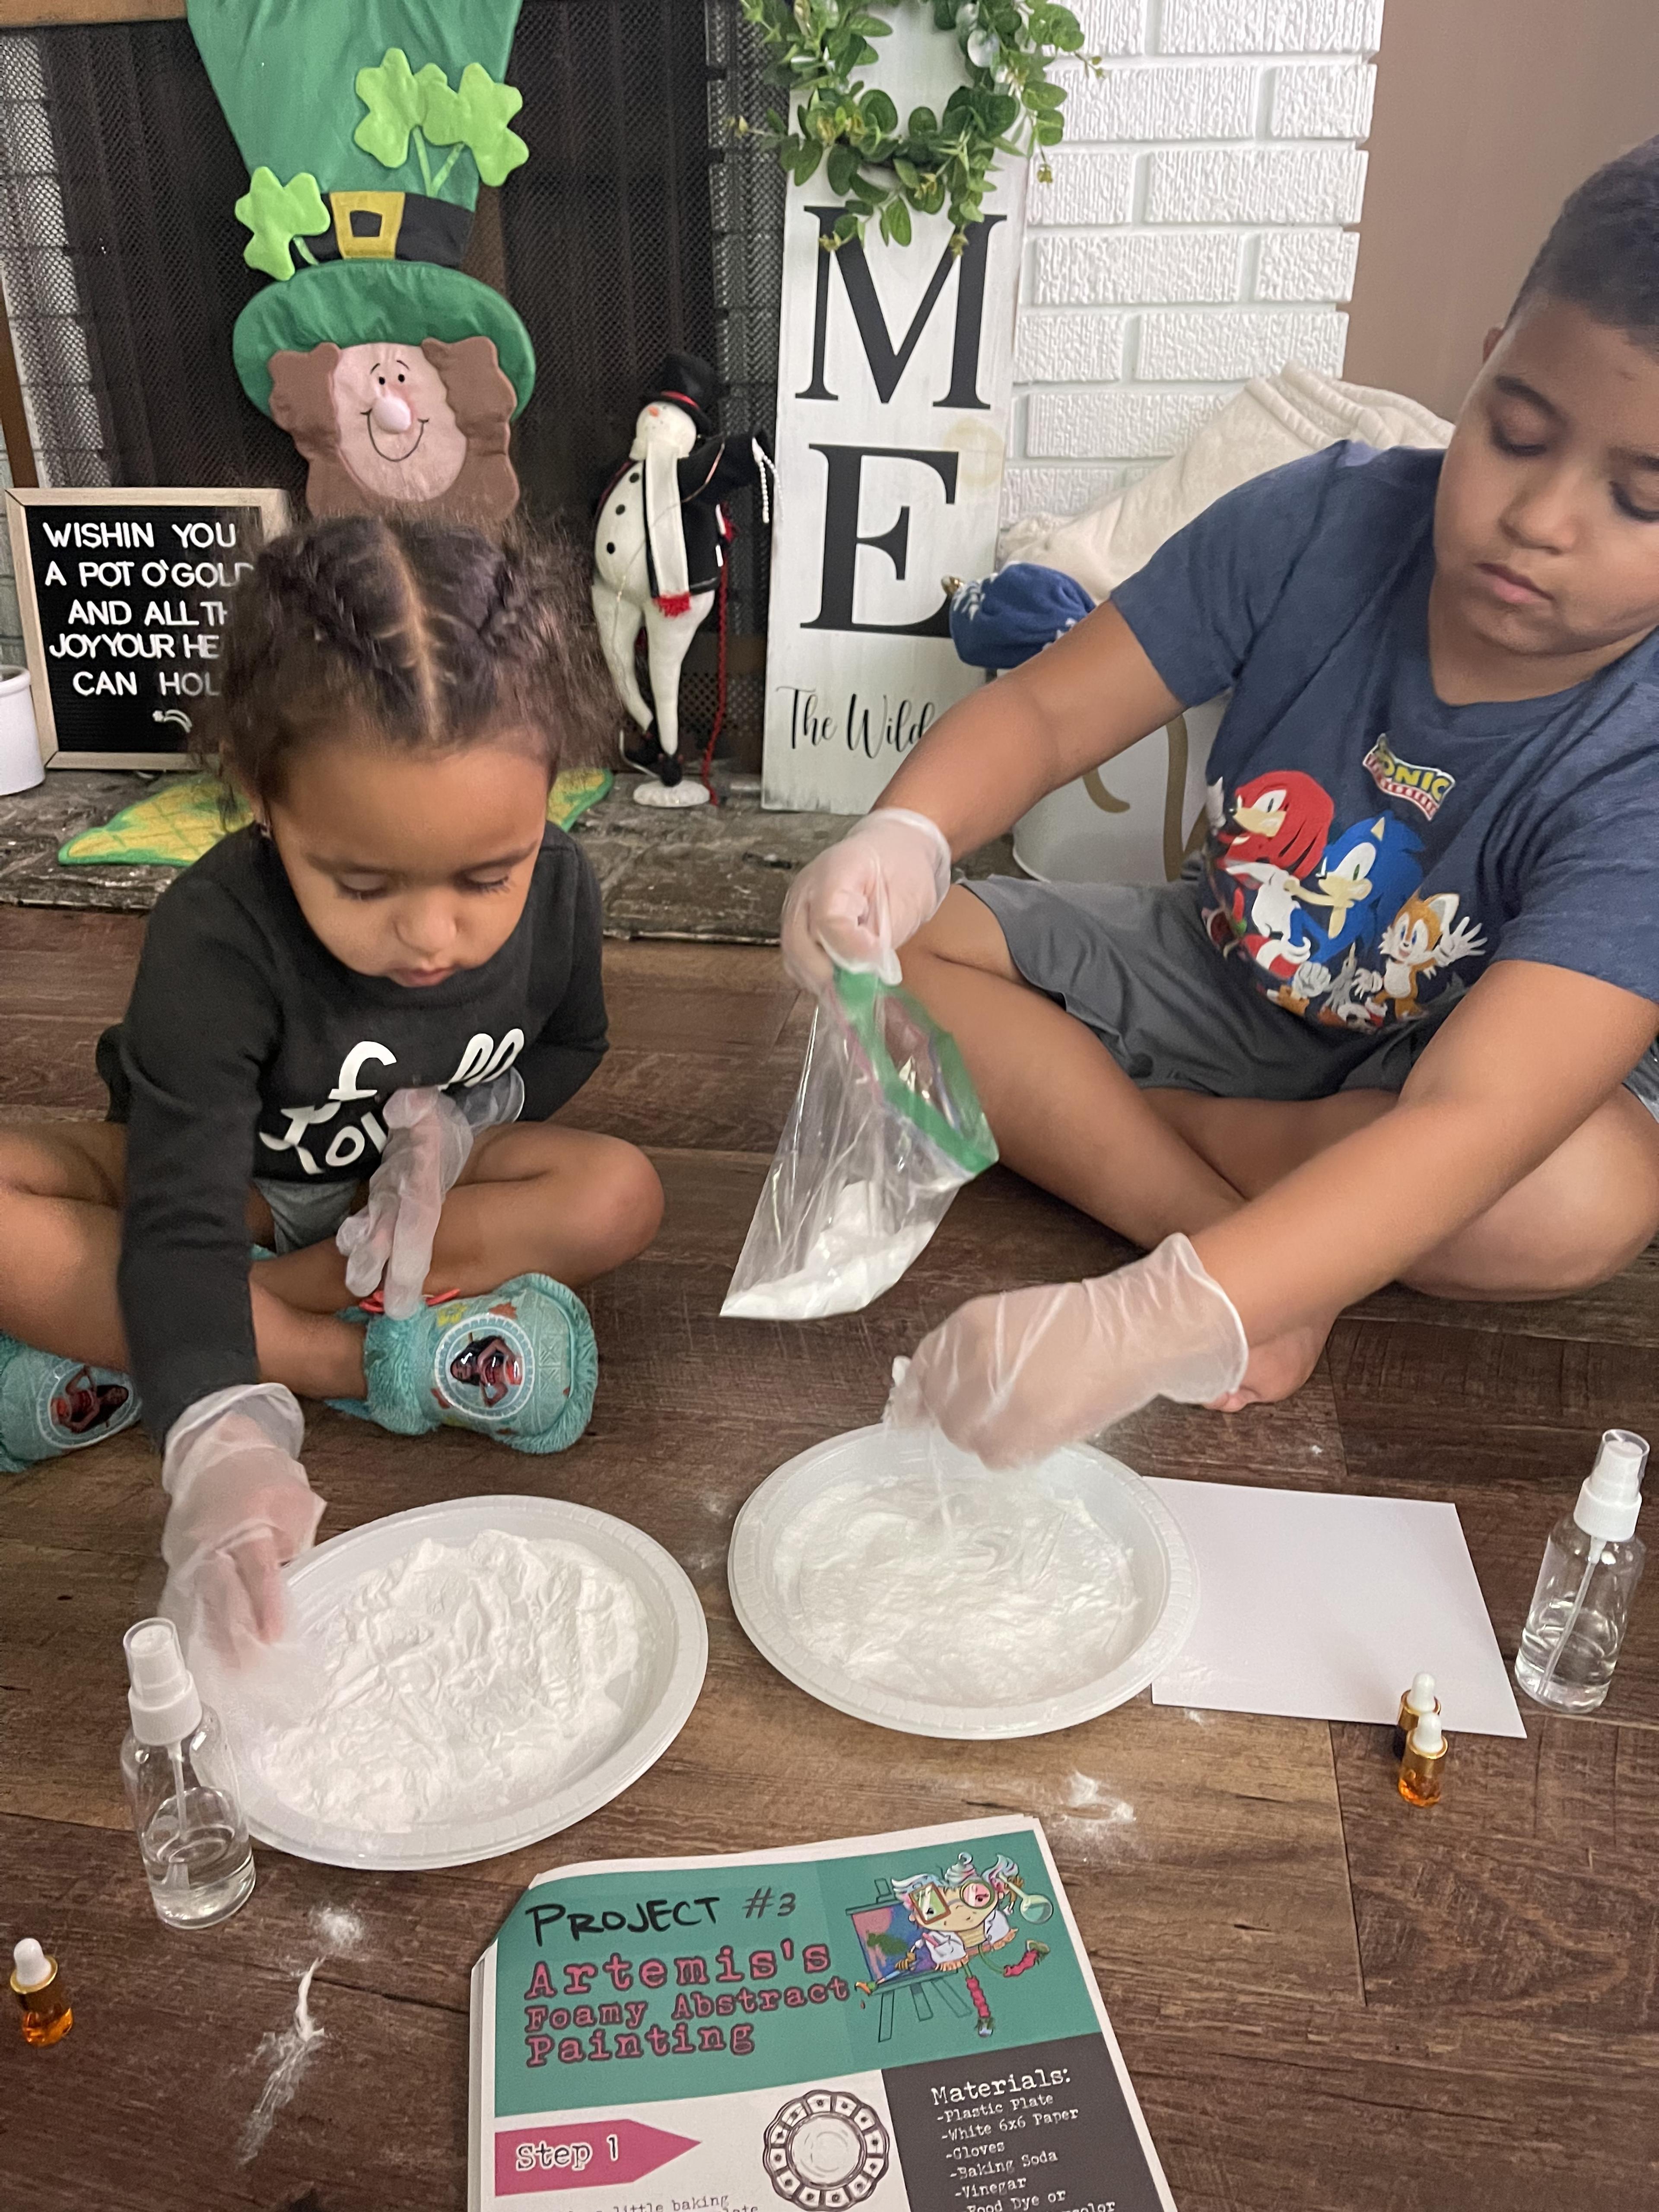 Jeremey and Jada Wilder Kids create art at home with Artchemist Project Kit from Canton Museum of Art